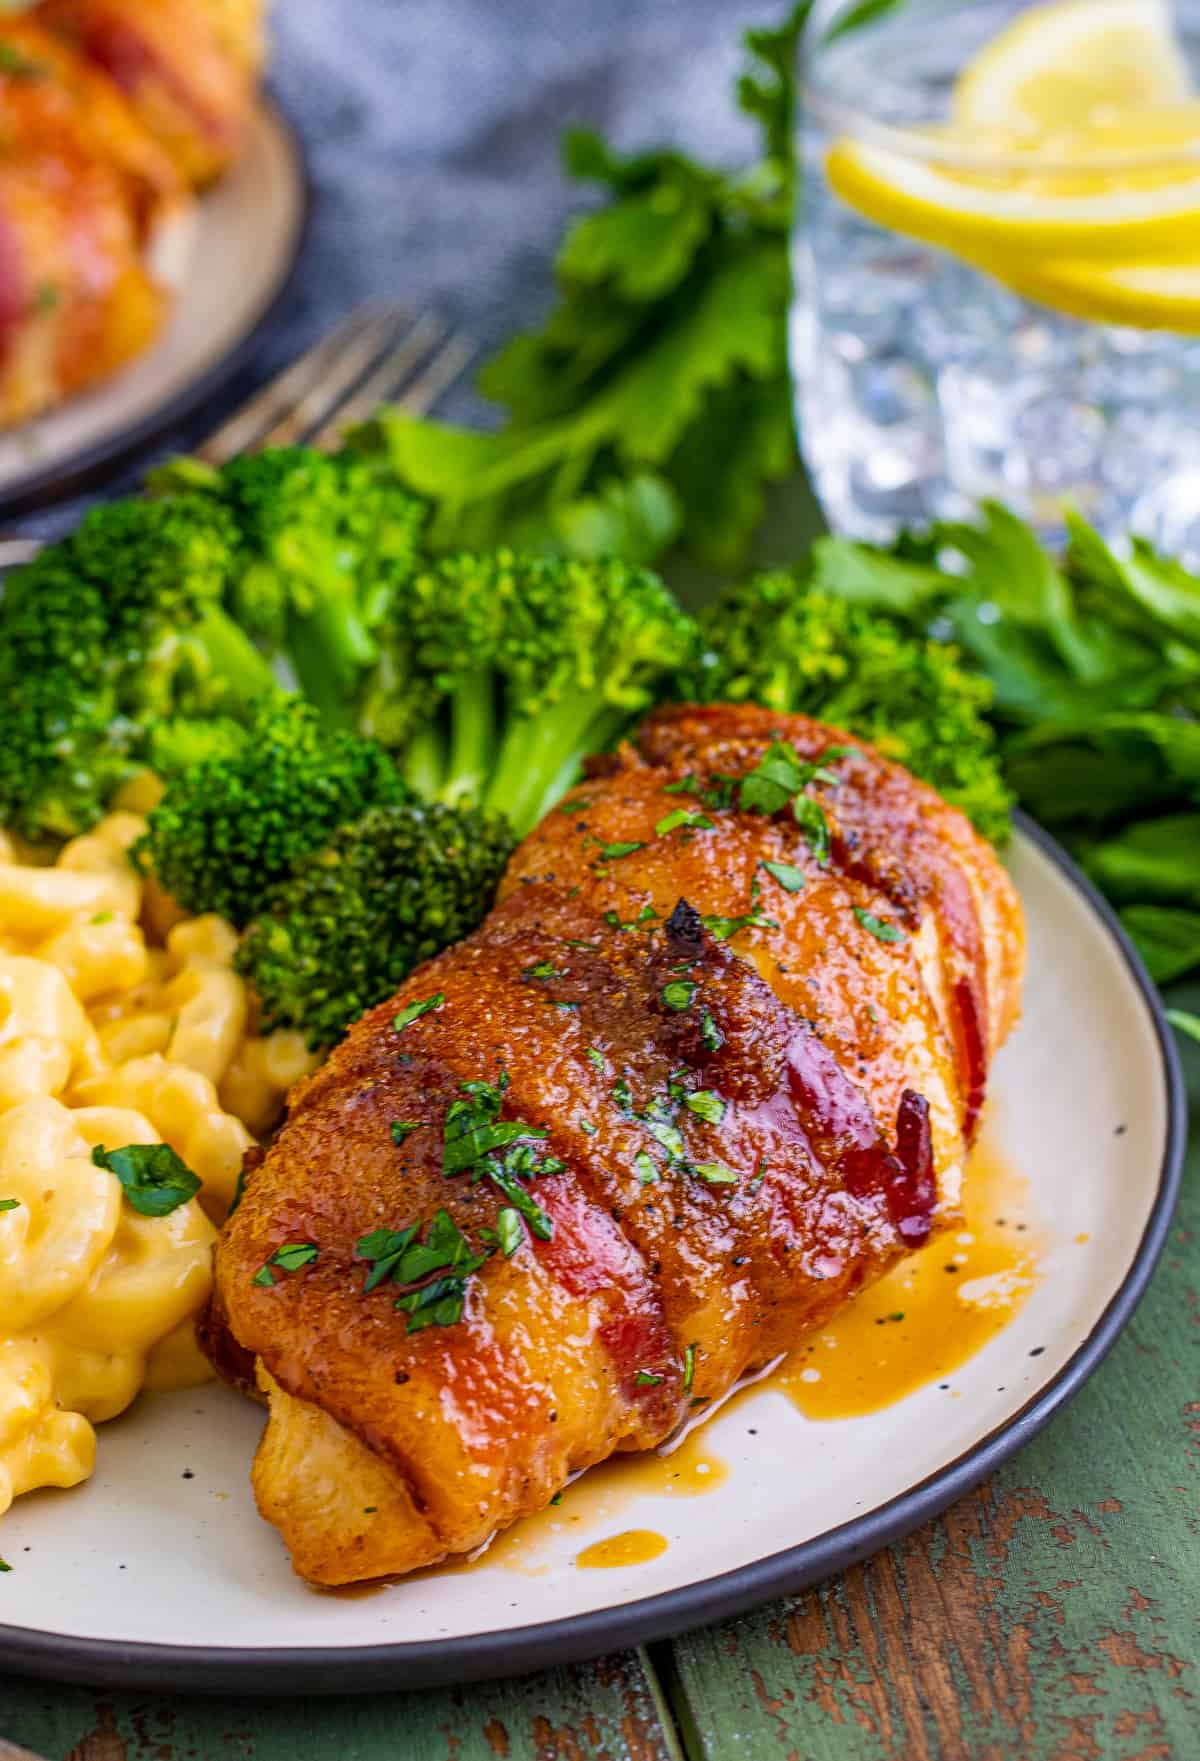 Bacon Wrapped Chicken on white plate garnished with parsley and served with macaroni and cheese and broccoli.